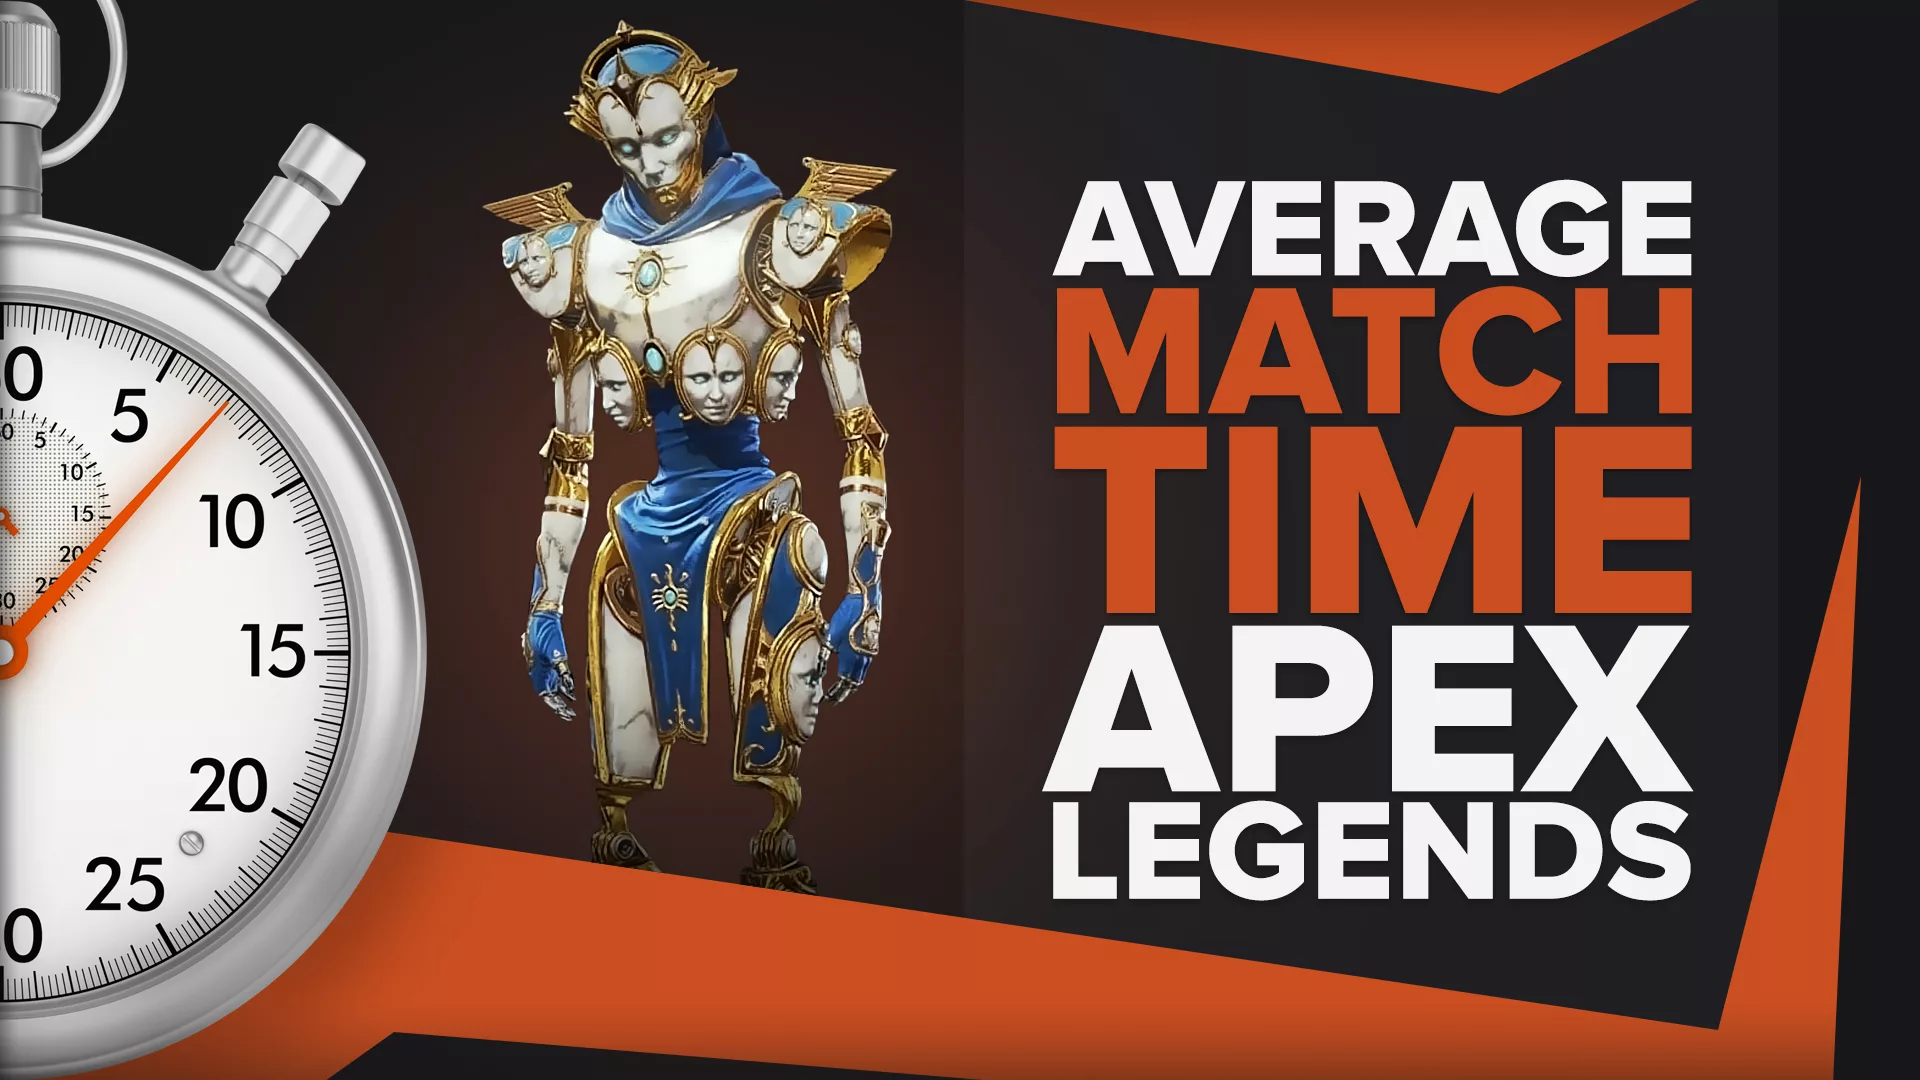 What's The Average Match Length Of Apex Legends?